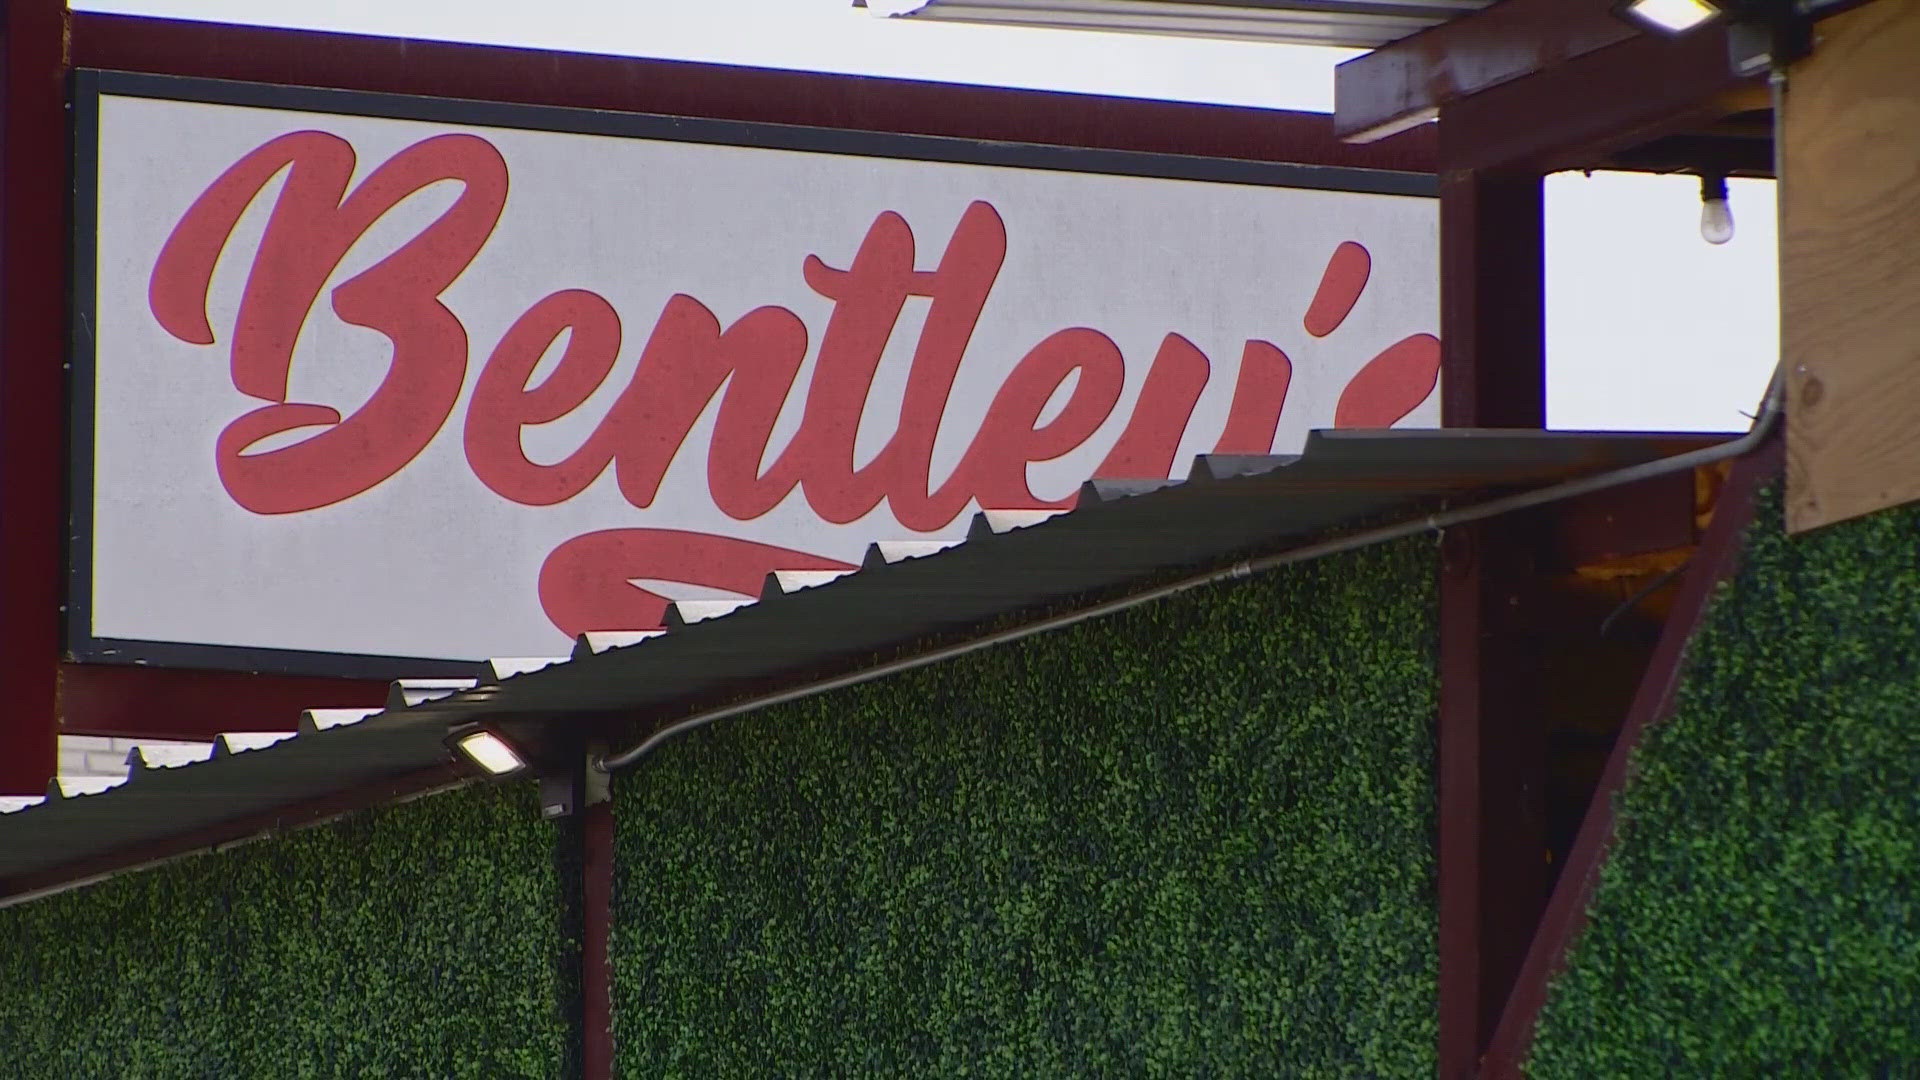 The City of San Antonio issued a cease-and-desist letter to Bentley's Bar after the DART team found several code violations.